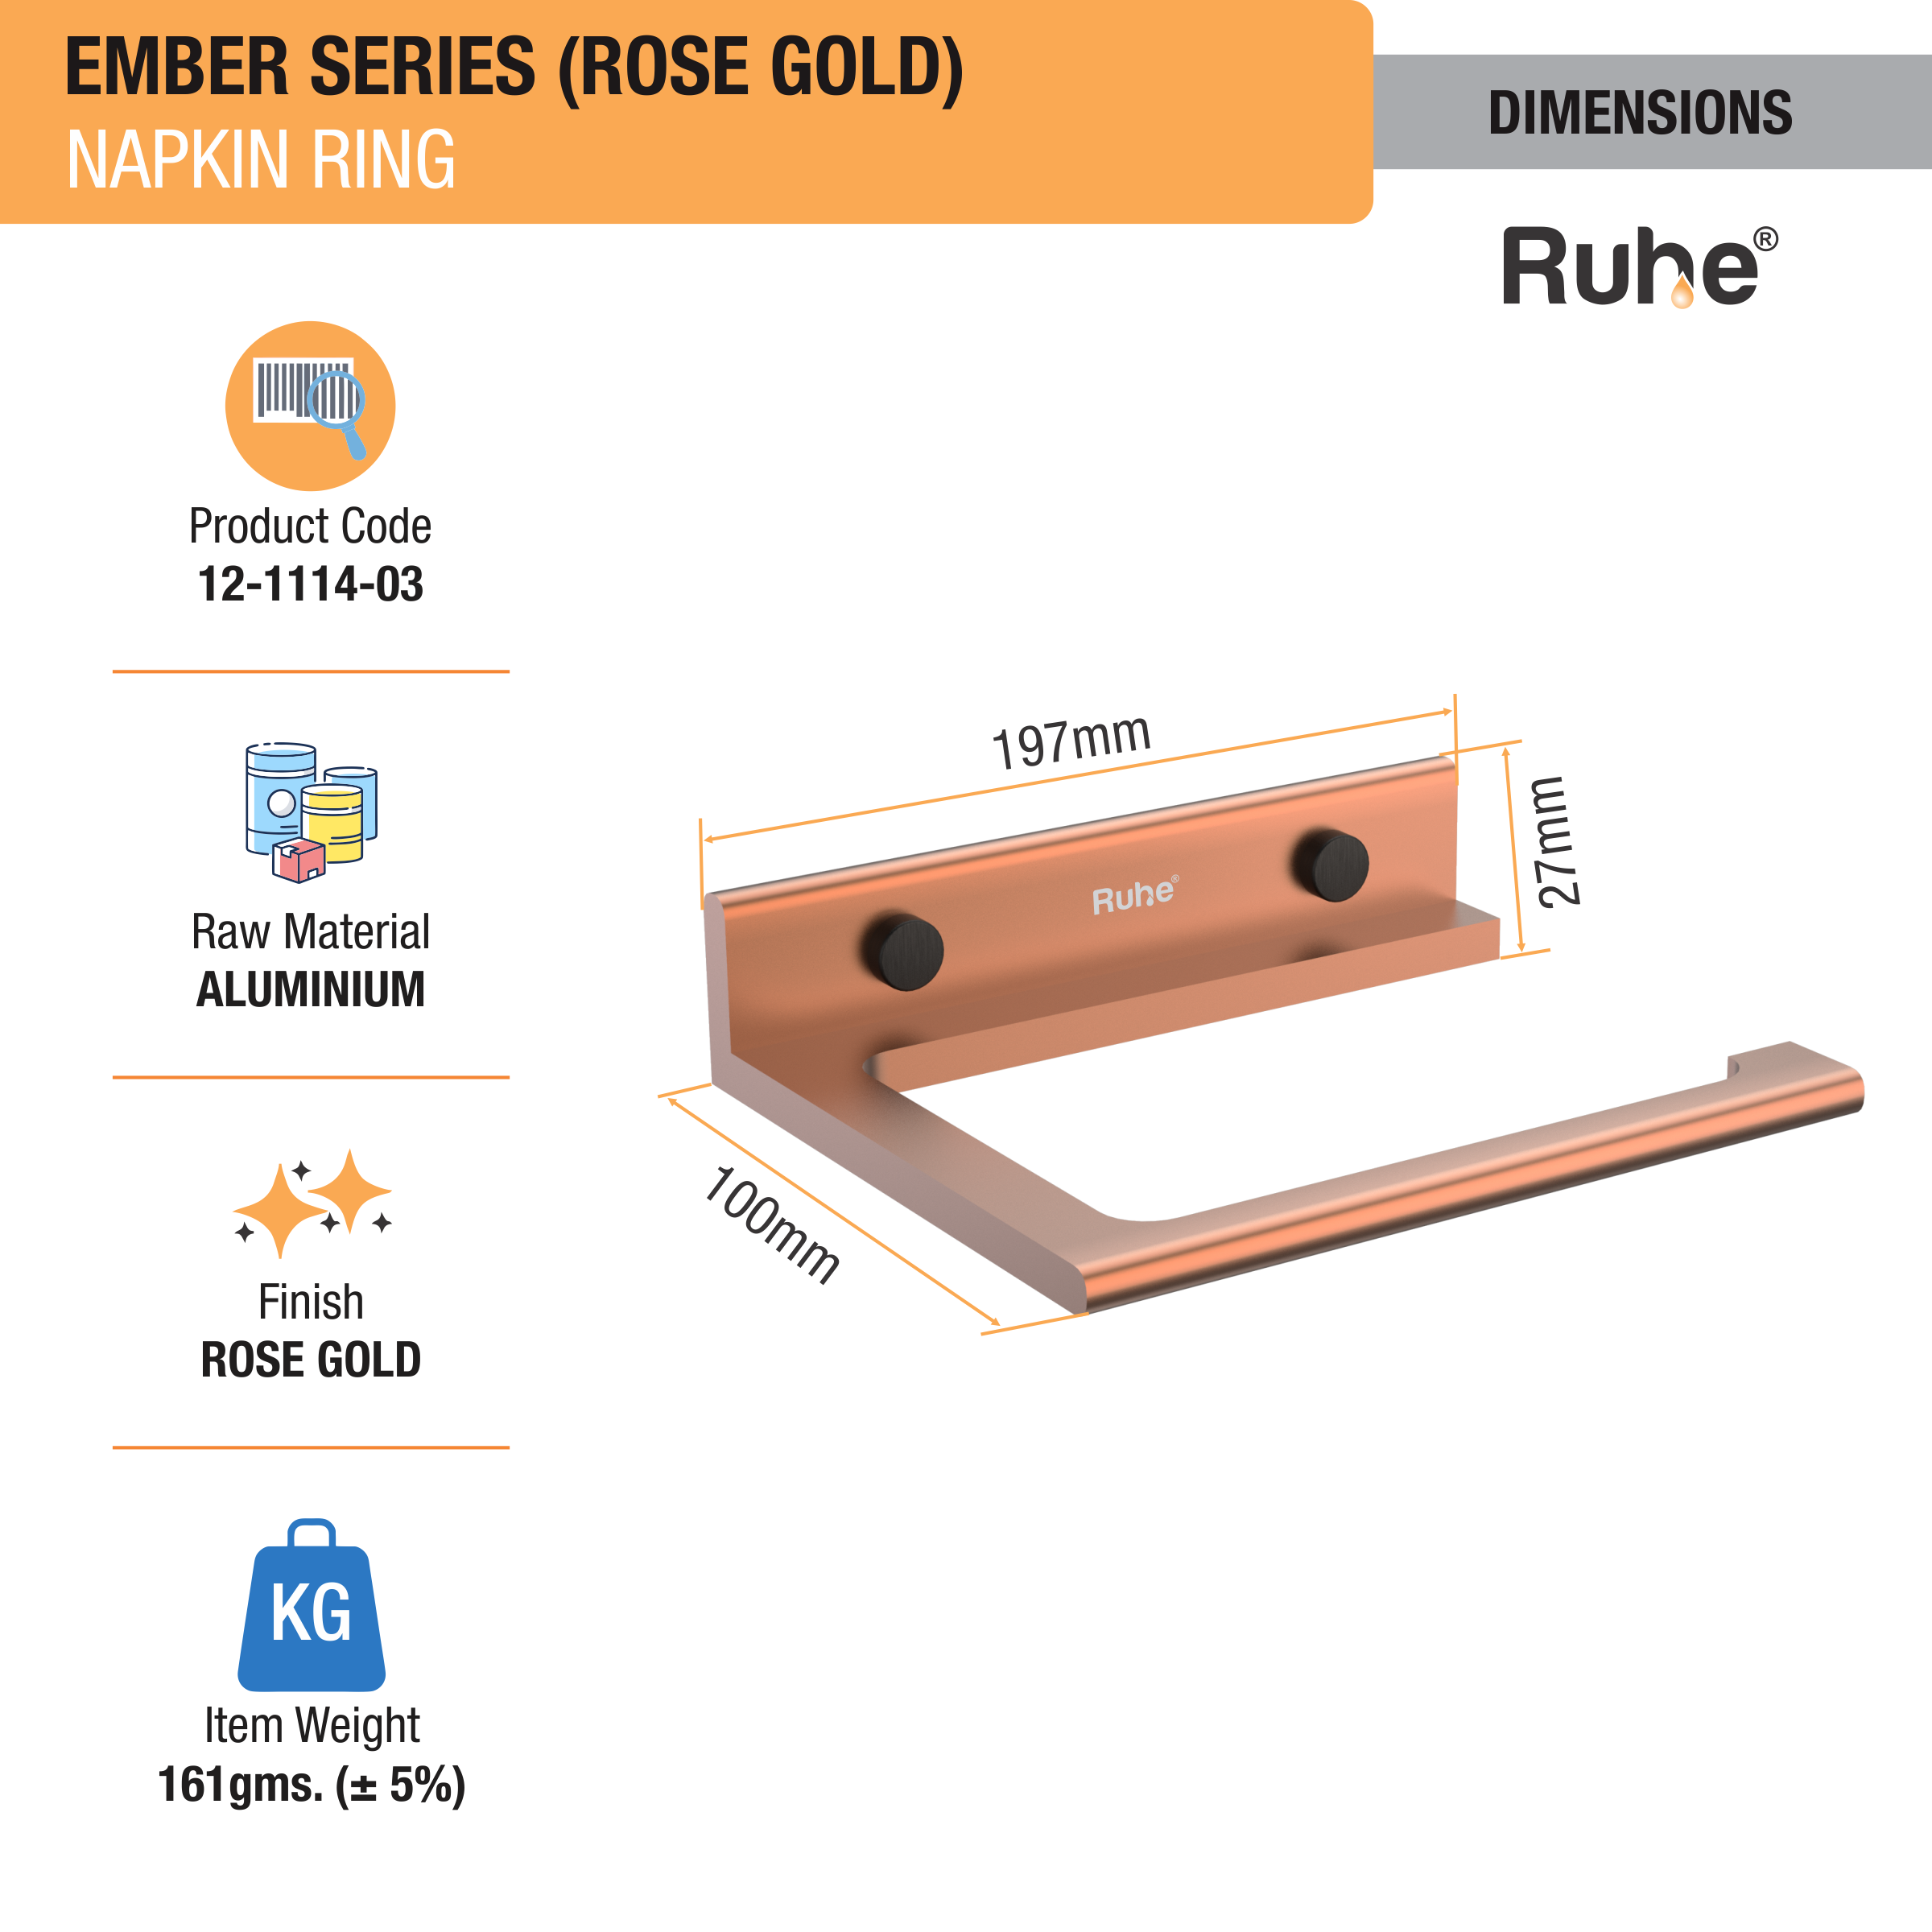 Ember Rose Gold Napkin Ring (Space Aluminium) dimensions and sizes